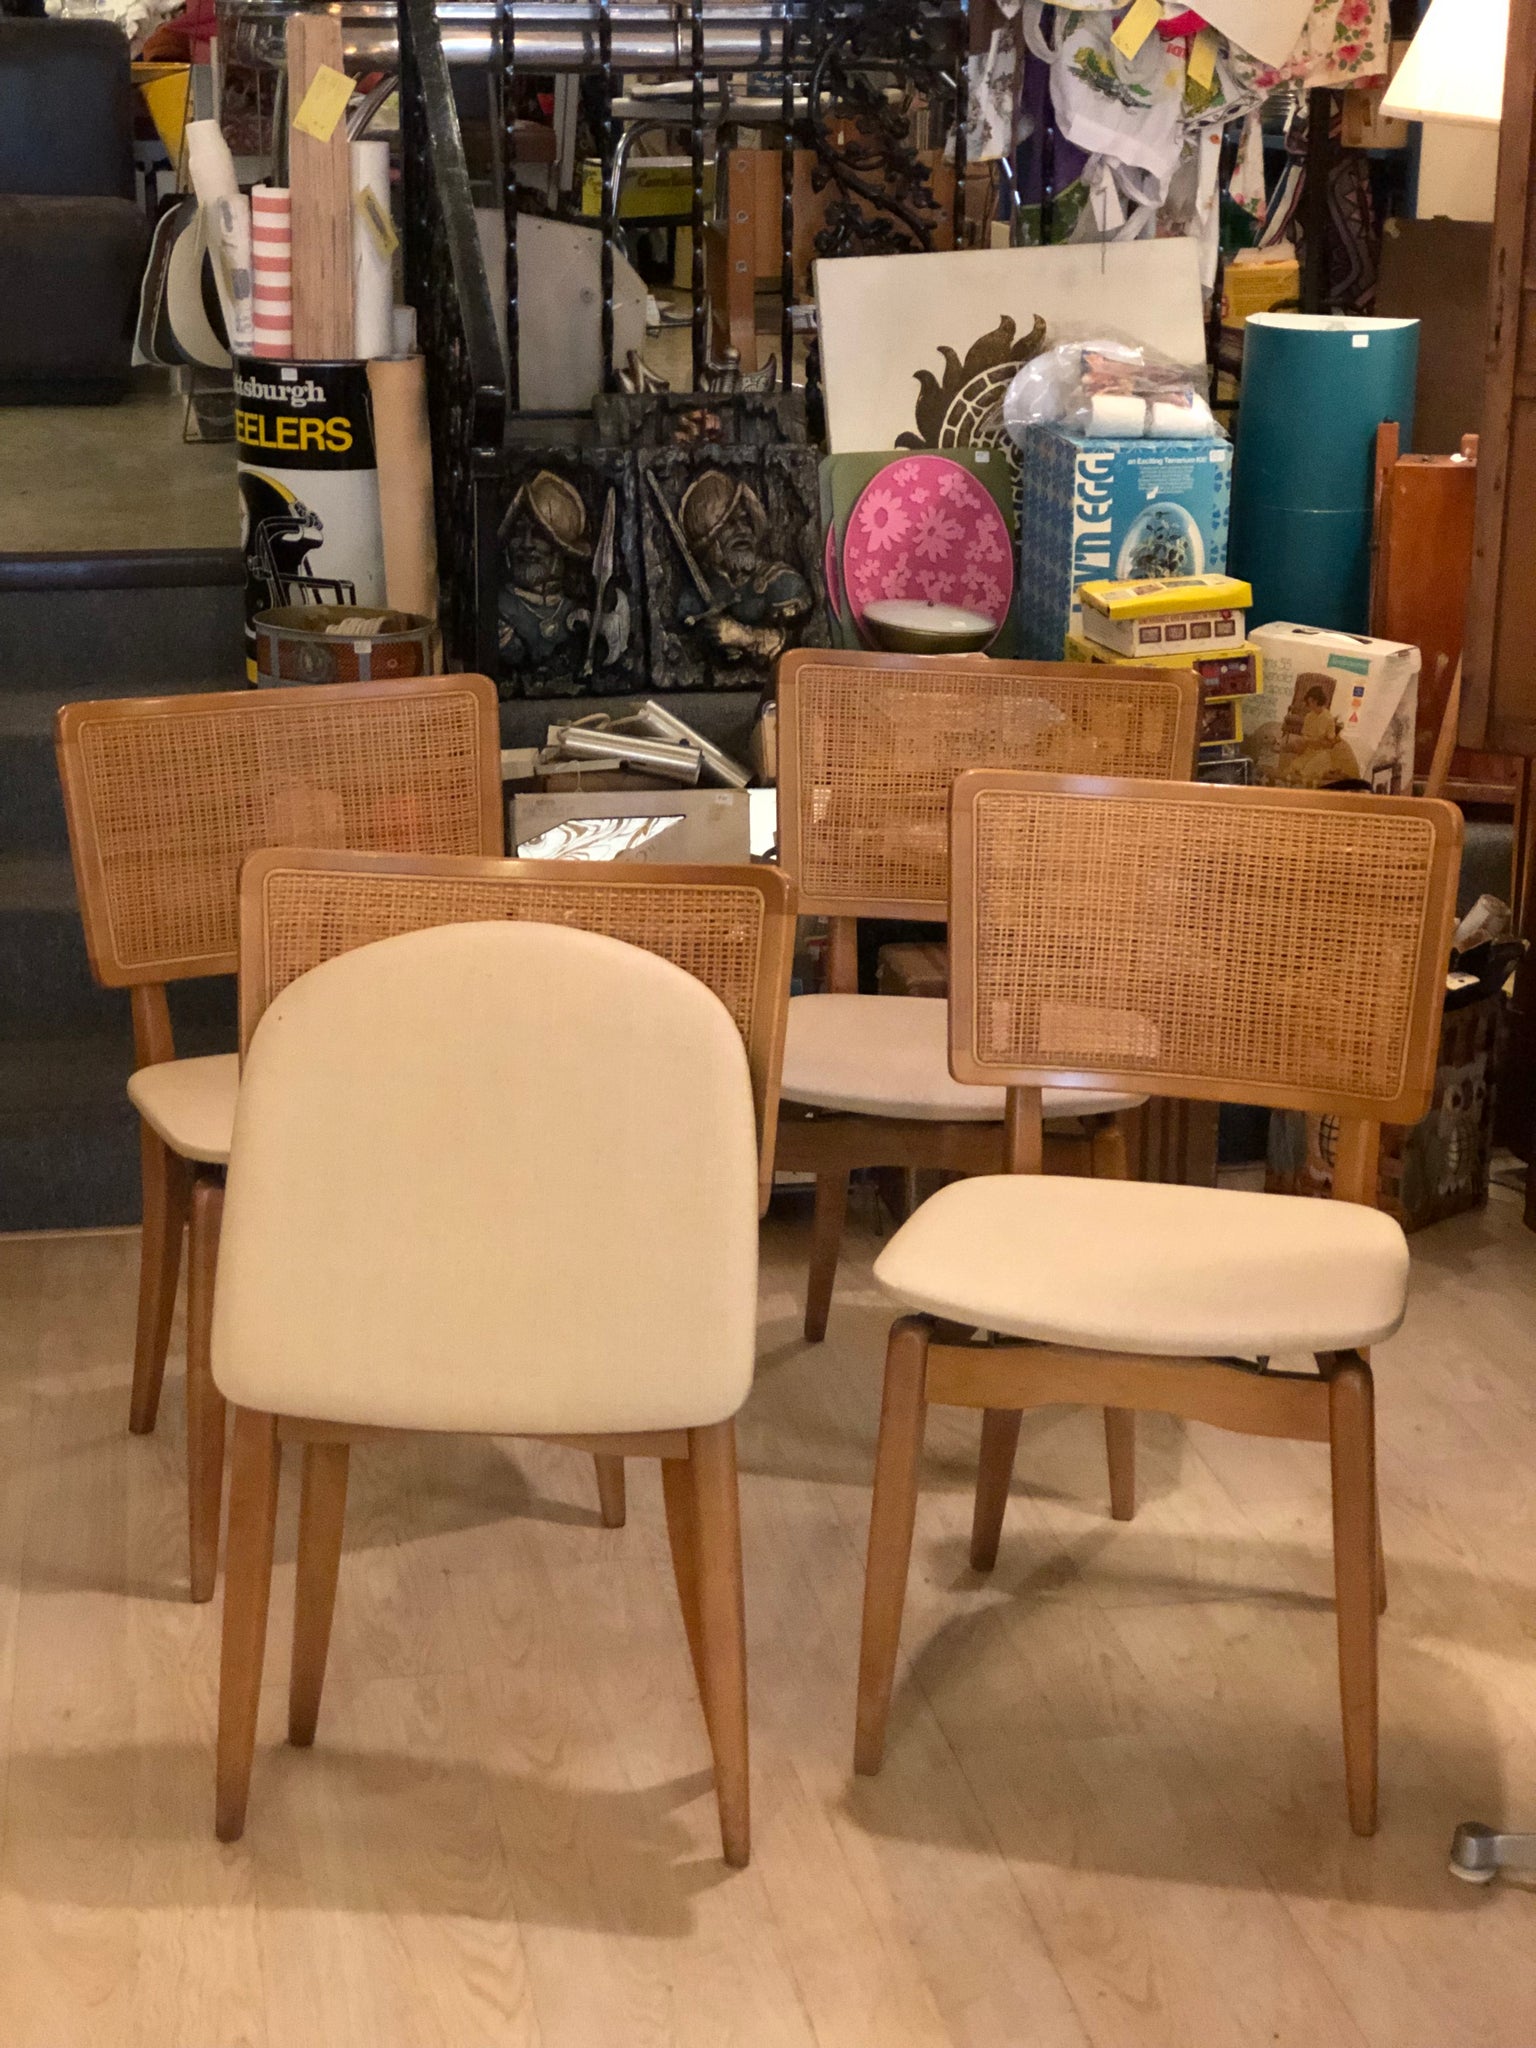 4 Stakmore Cane Back Folding chairs